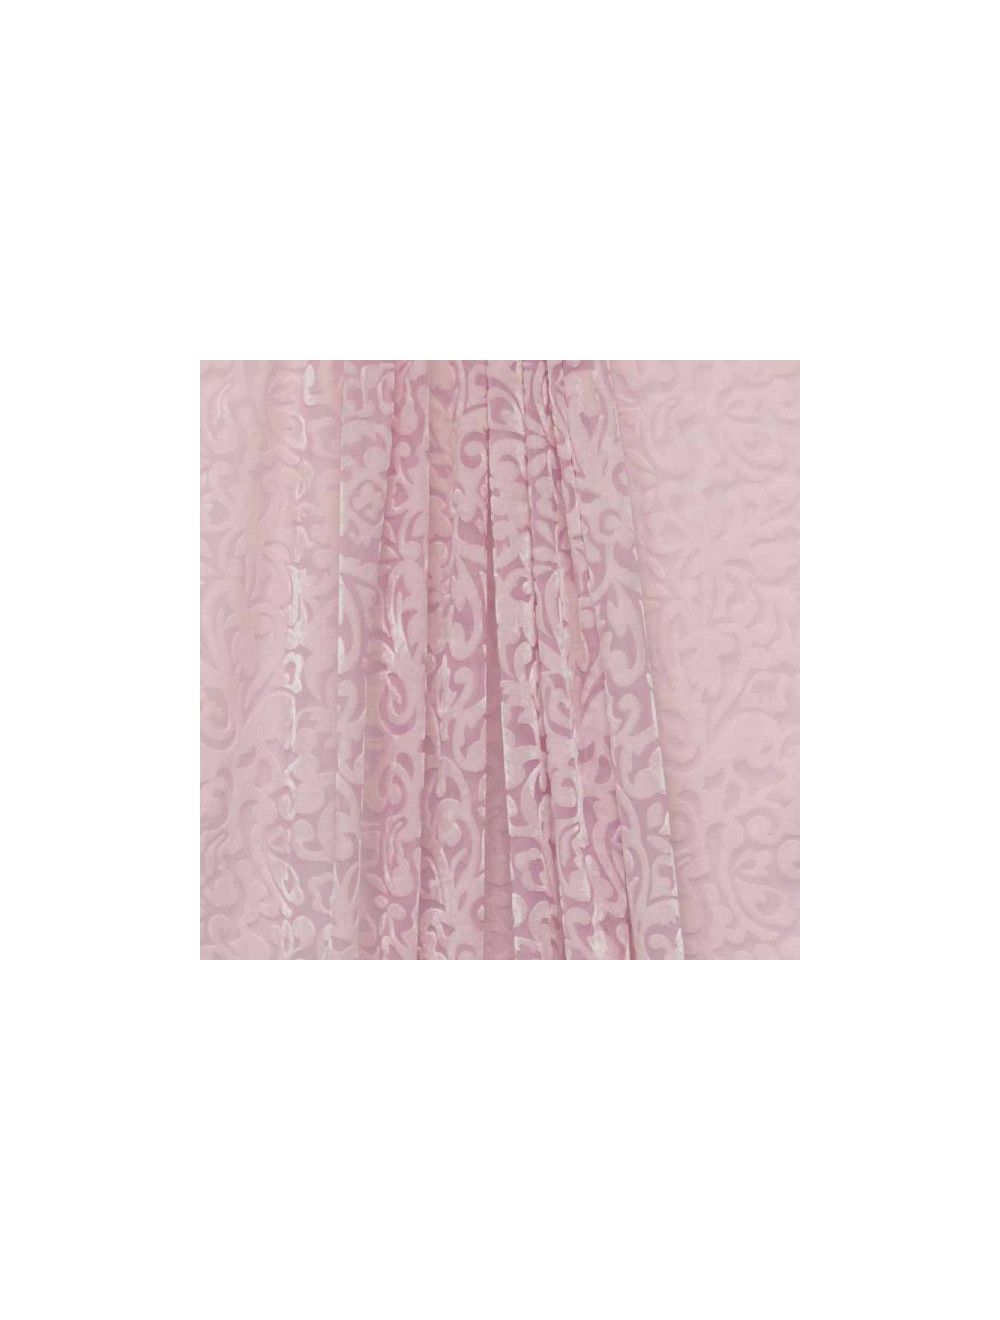 Baby Pink Velvet Brasso Fabric with All Over Design